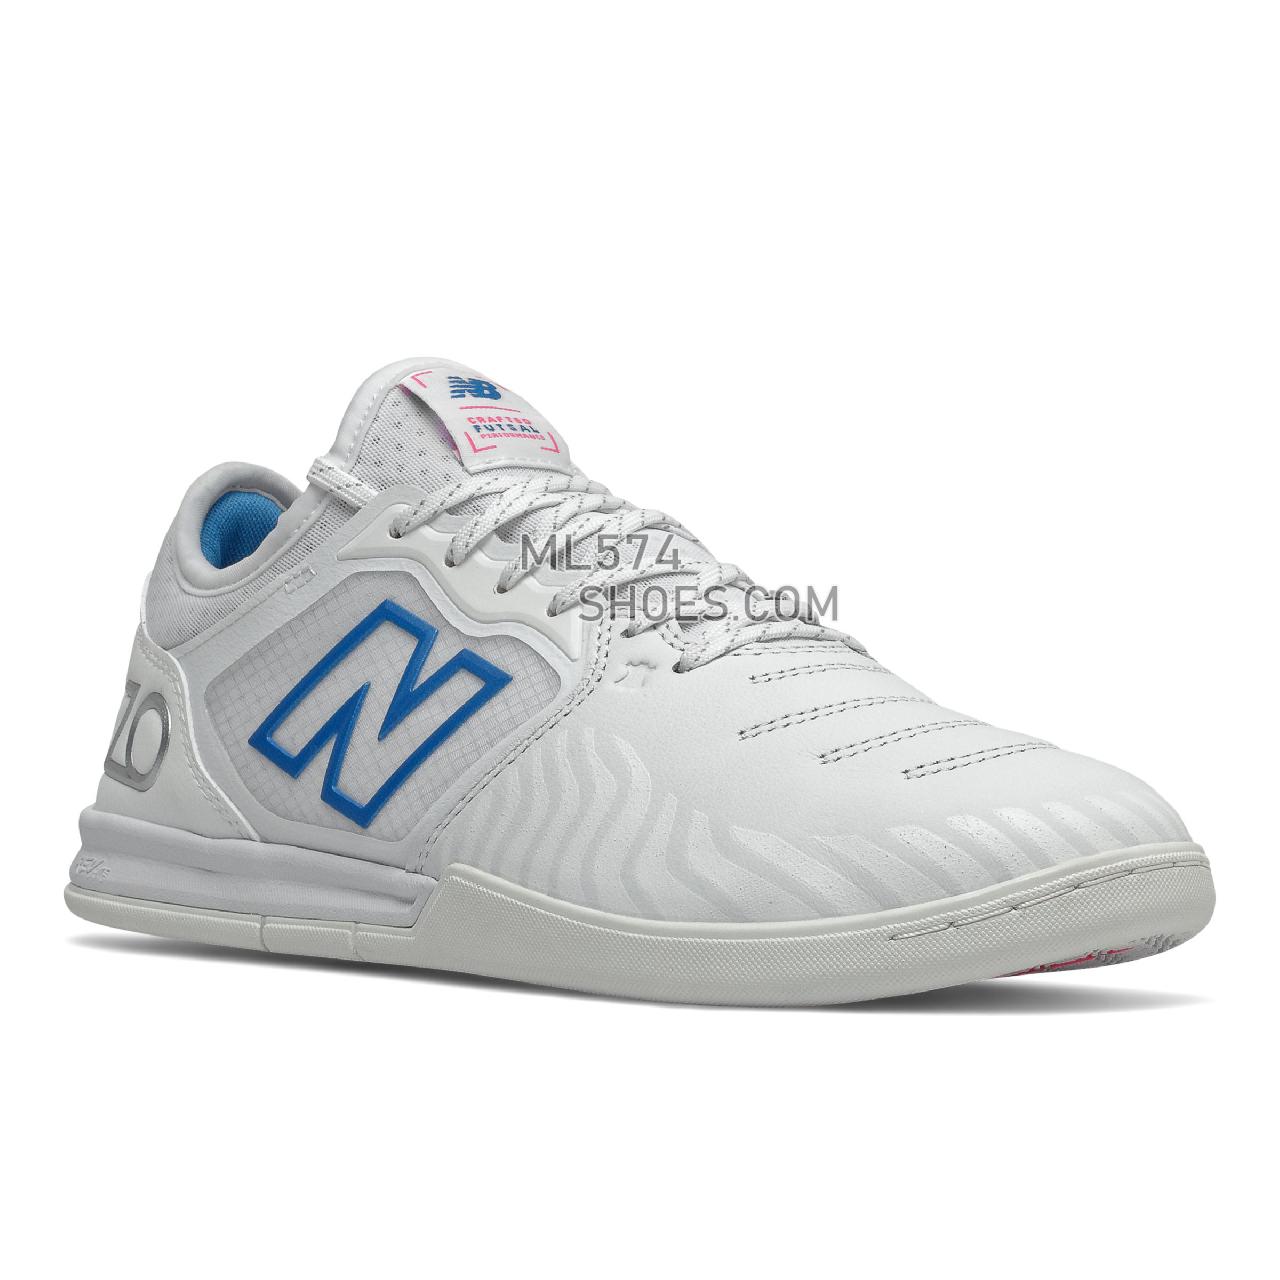 New Balance audazo V5+ Pro IN - Men's Turf FootBall Boots - White with Helium and Pink Glo - MSA1IW55